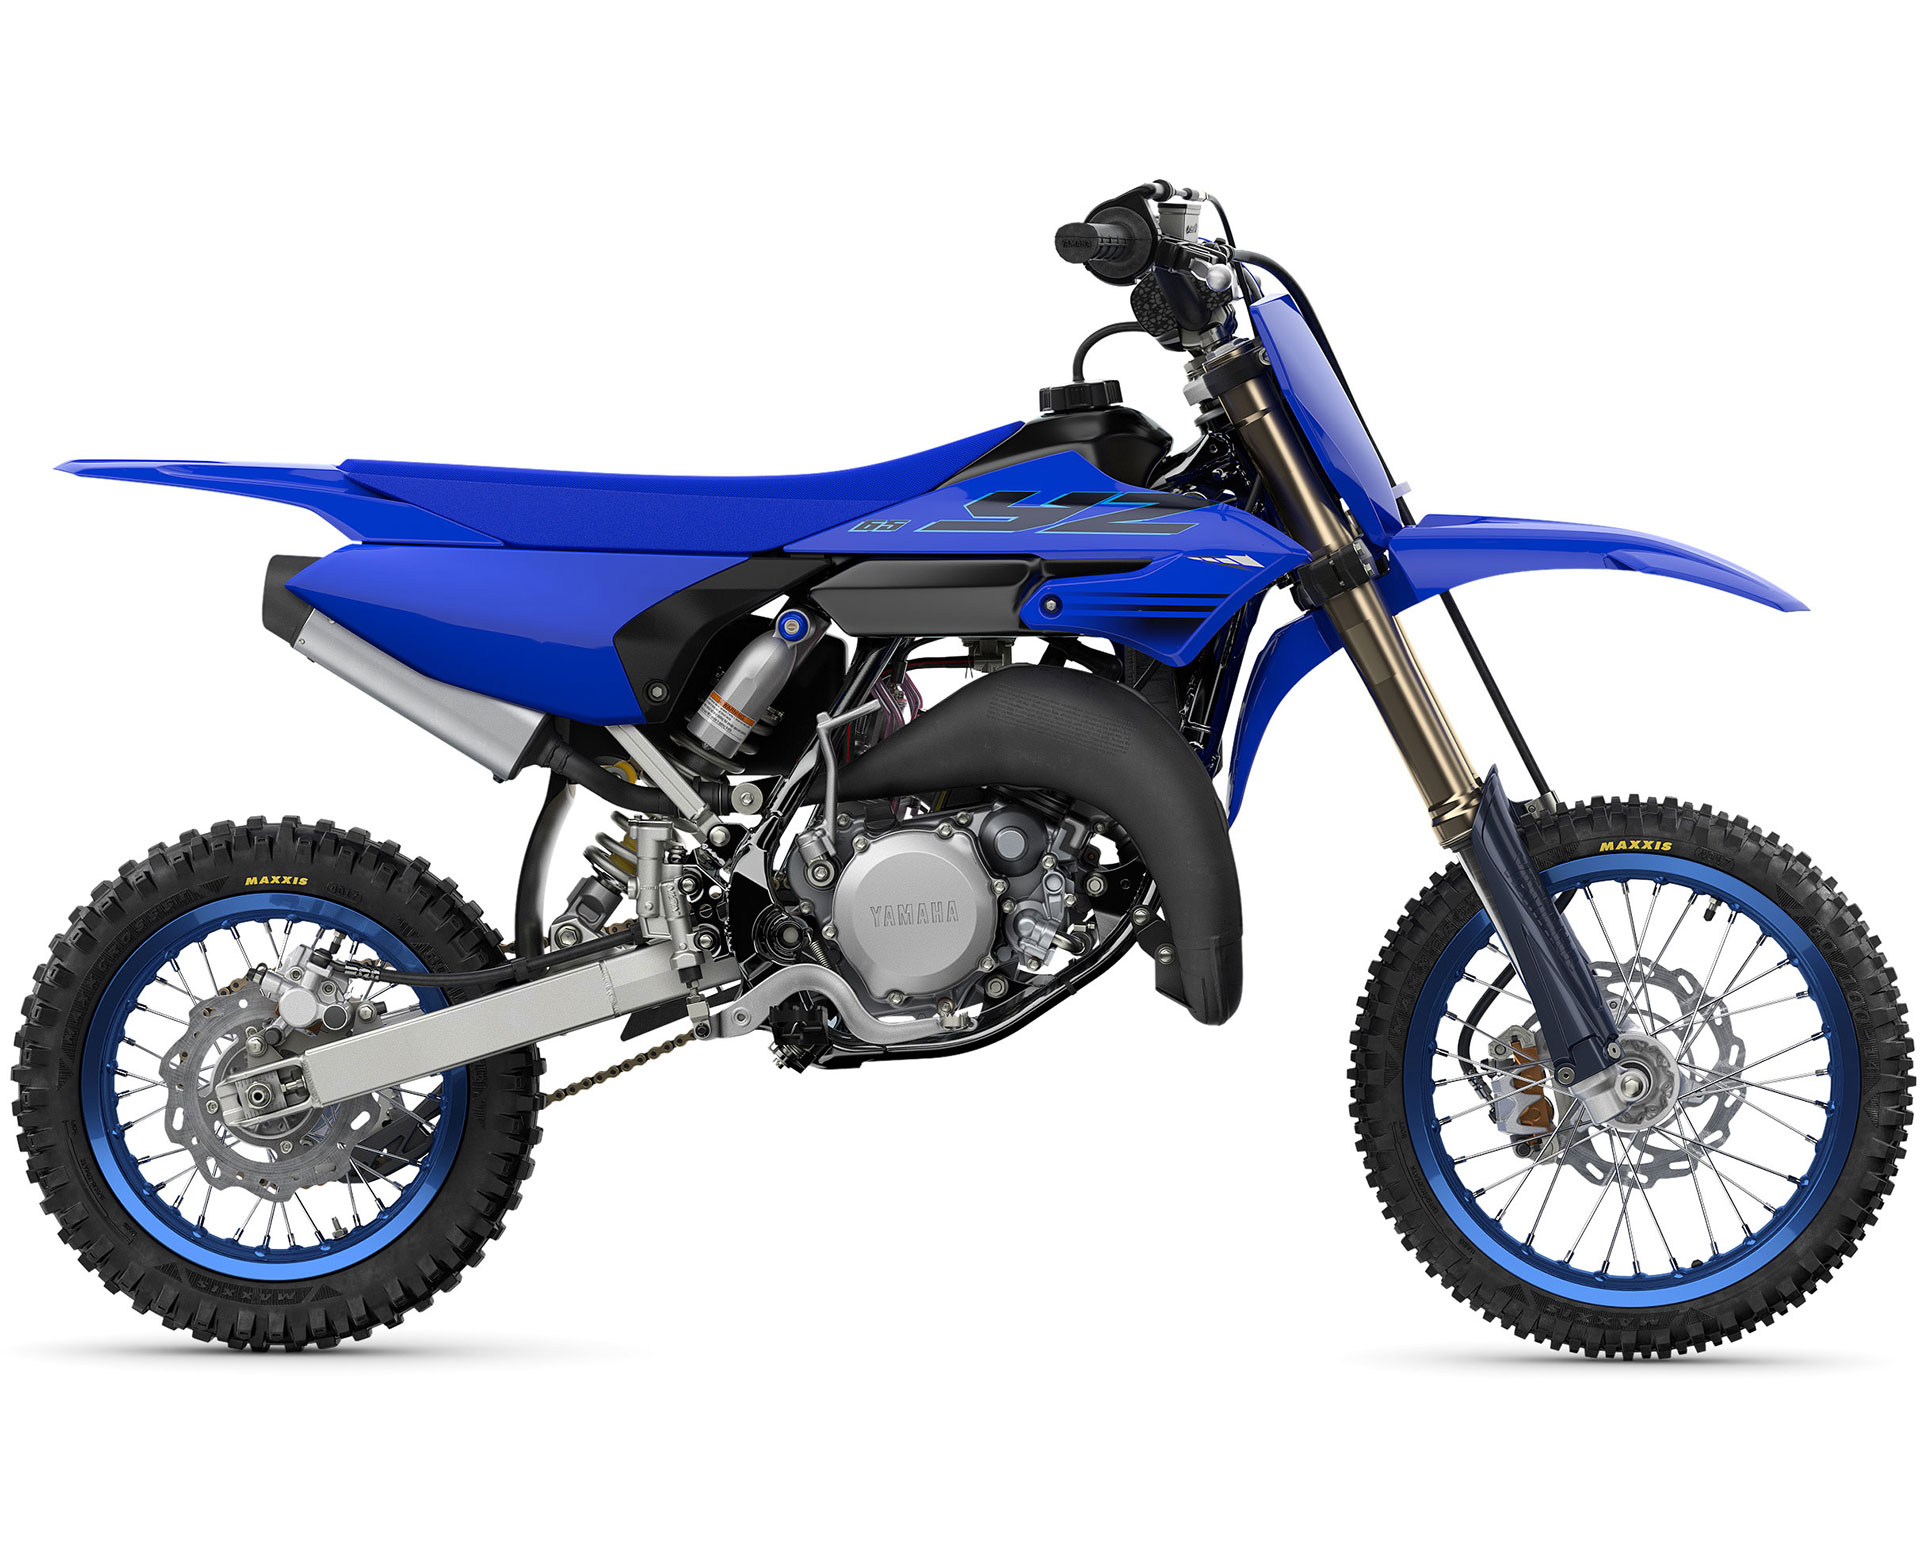 Thumbnail of your customized 2024 YZ65